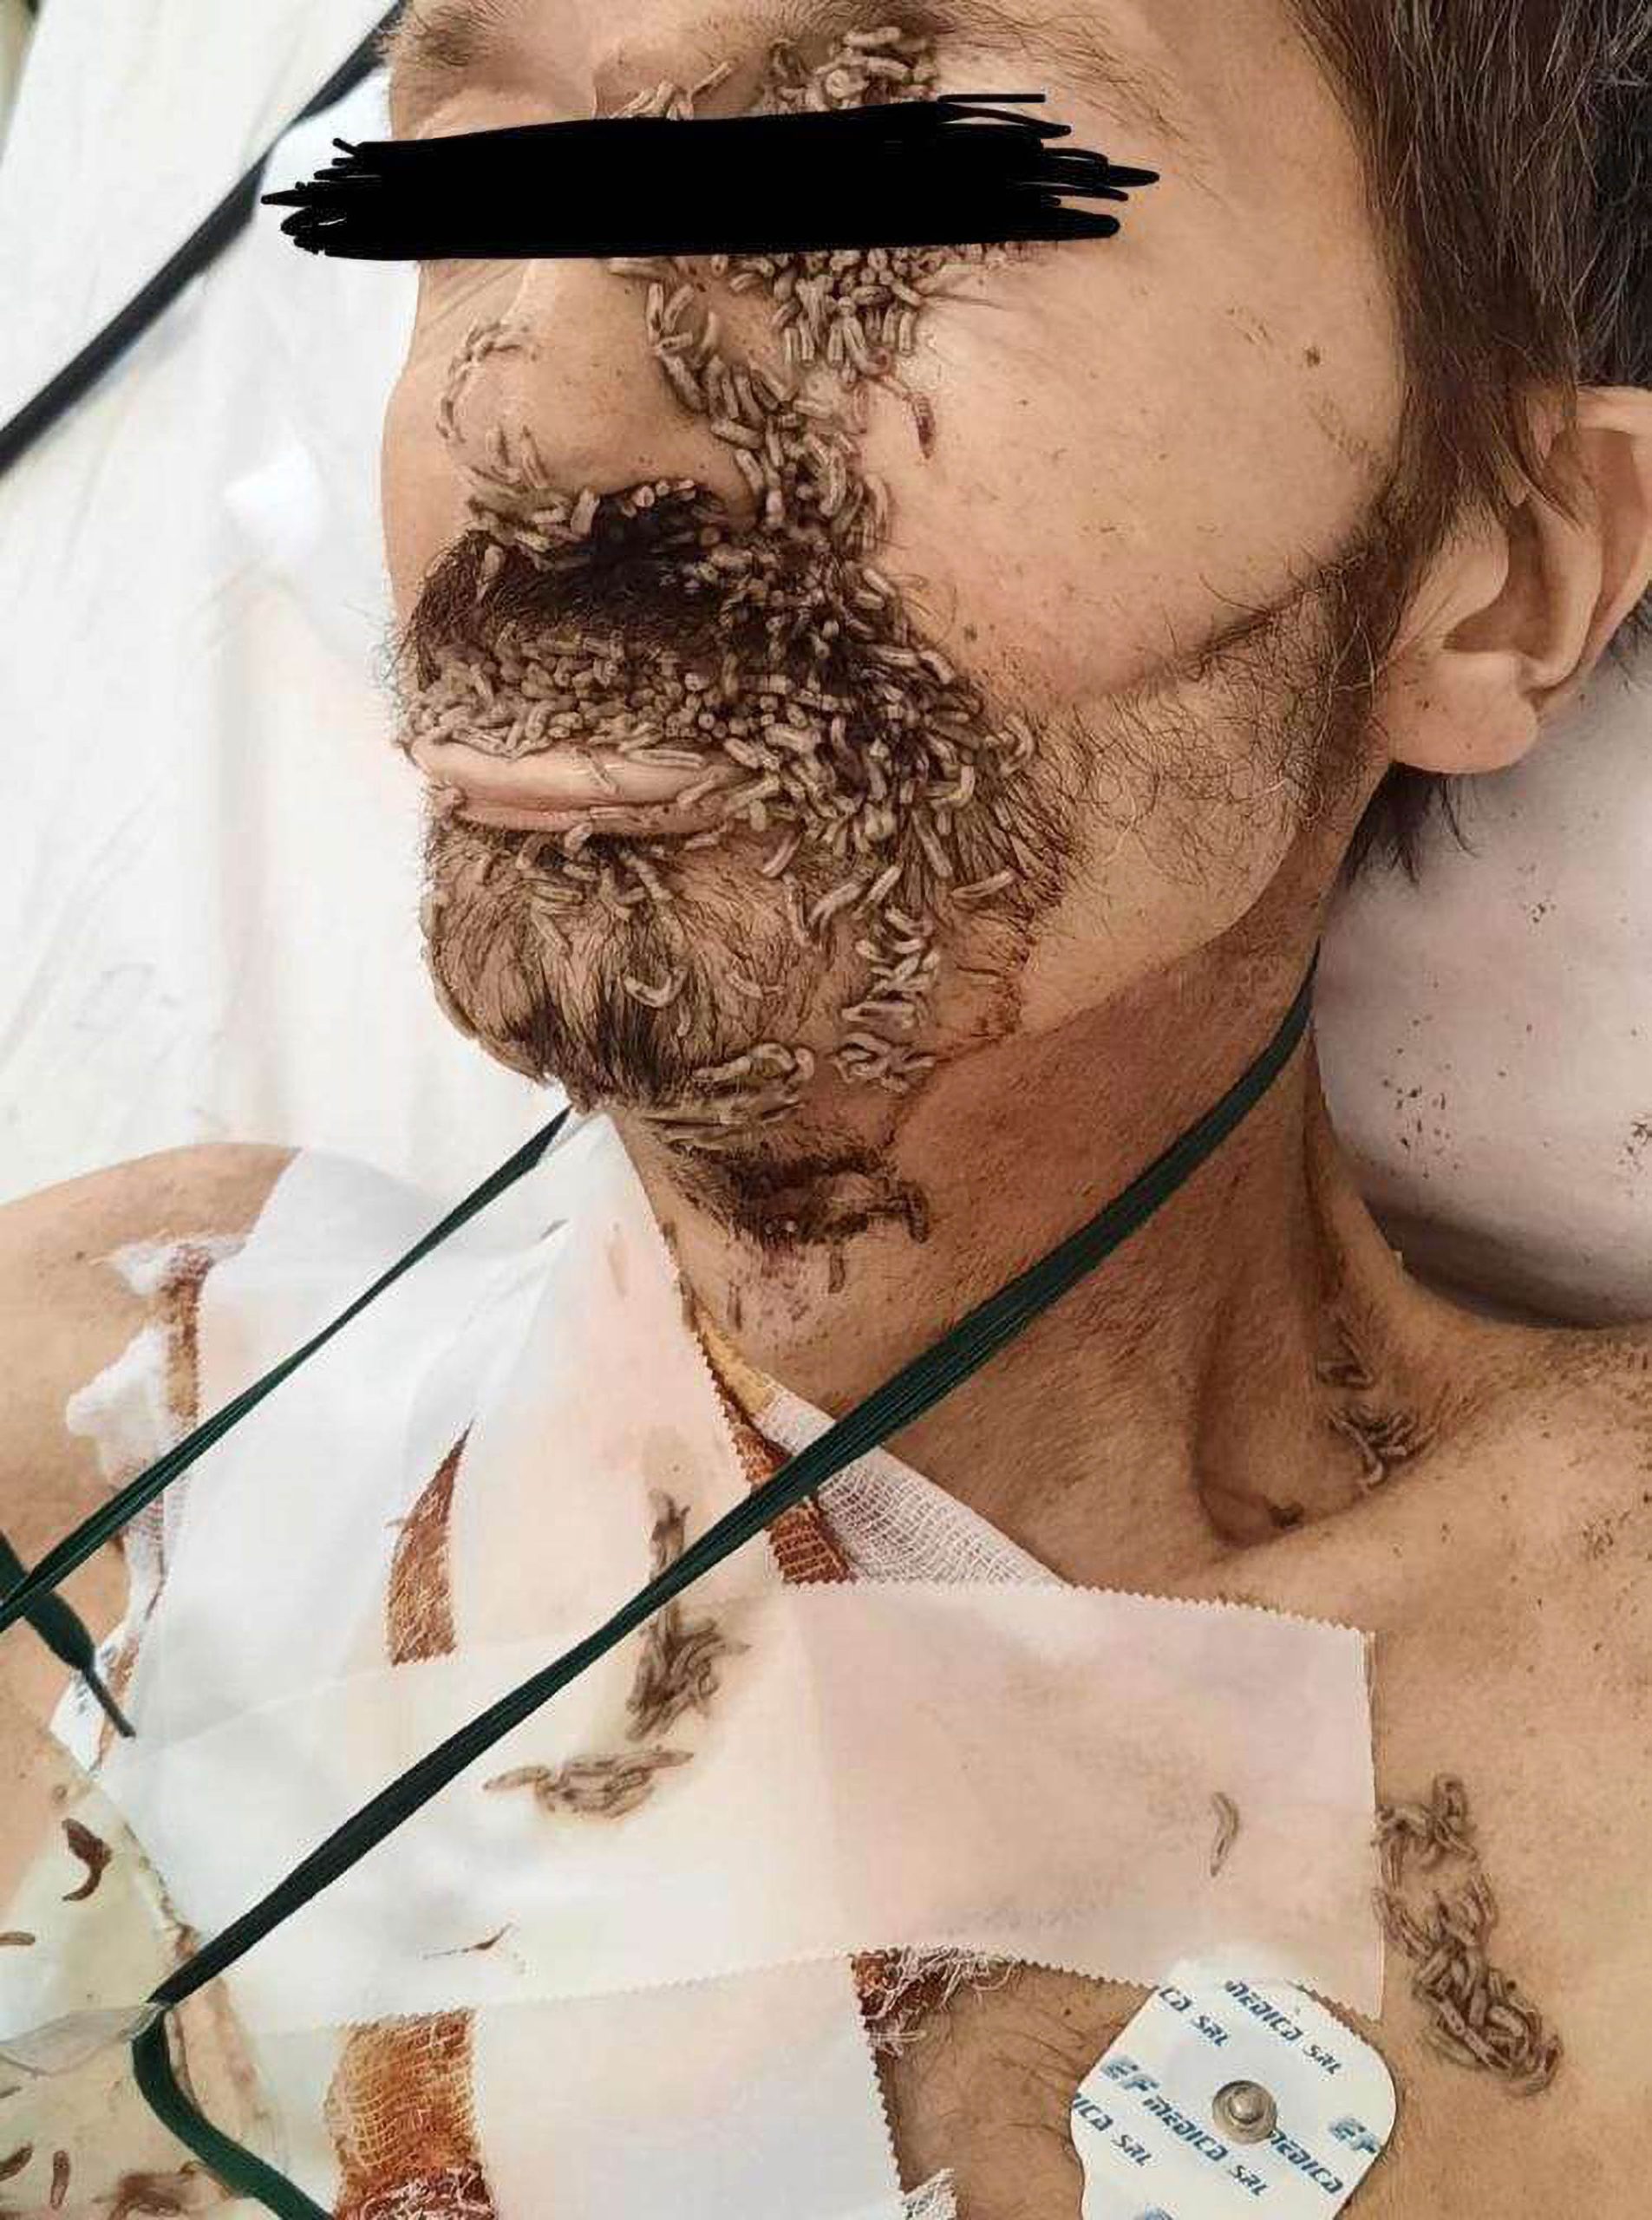 Read more about the article CHEW WON’T STOMACH THIS: Cancer Patient’s Face Eaten By Maggots